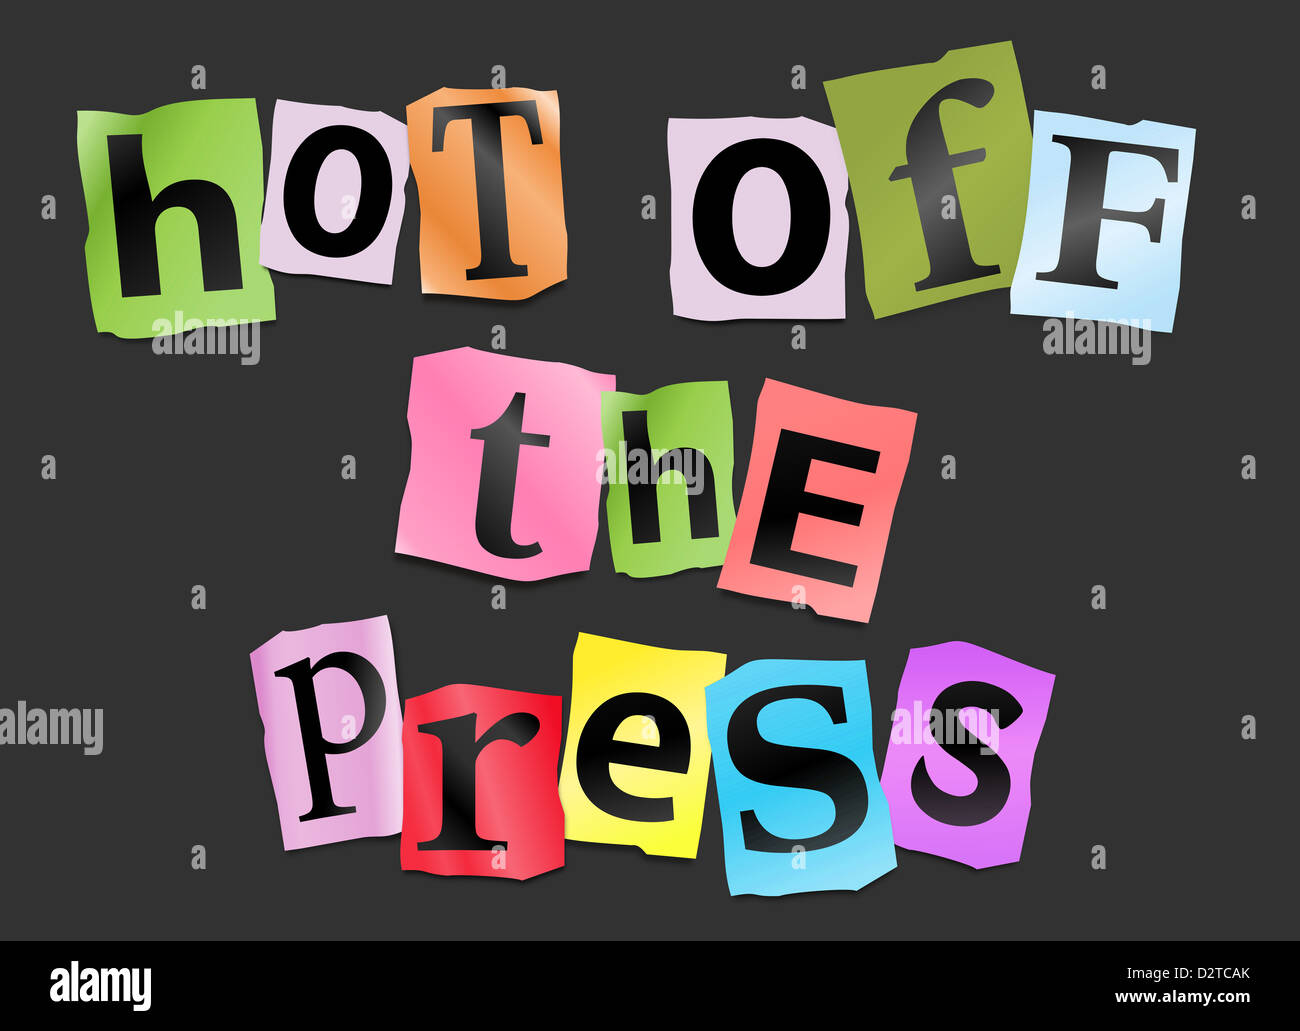 Hot off the press Stock Photo - Alamy